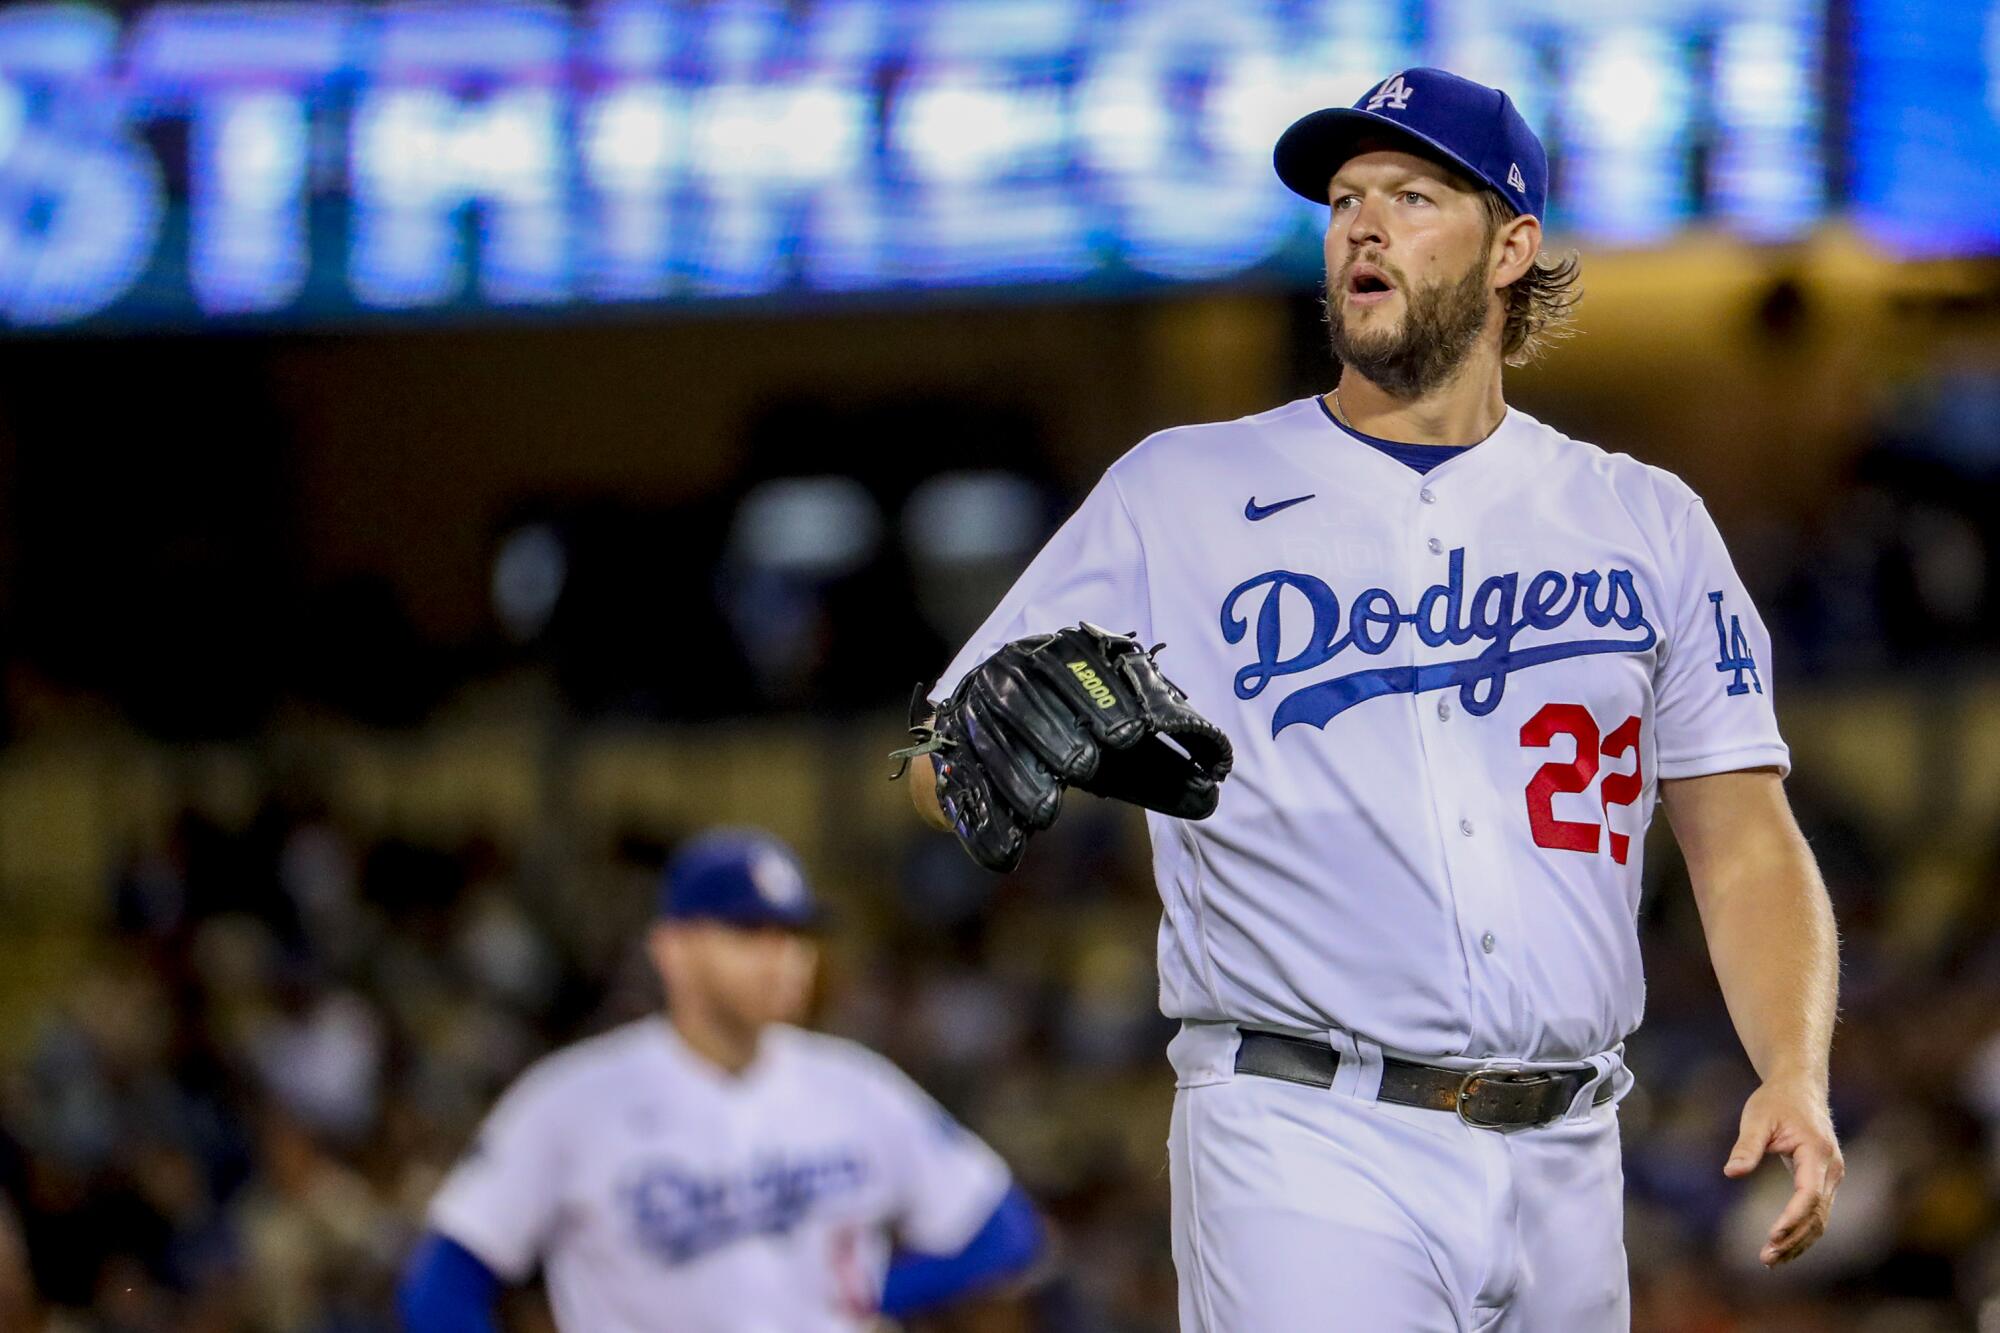 Clayton Kershaw finally appears at peace - Sports Illustrated